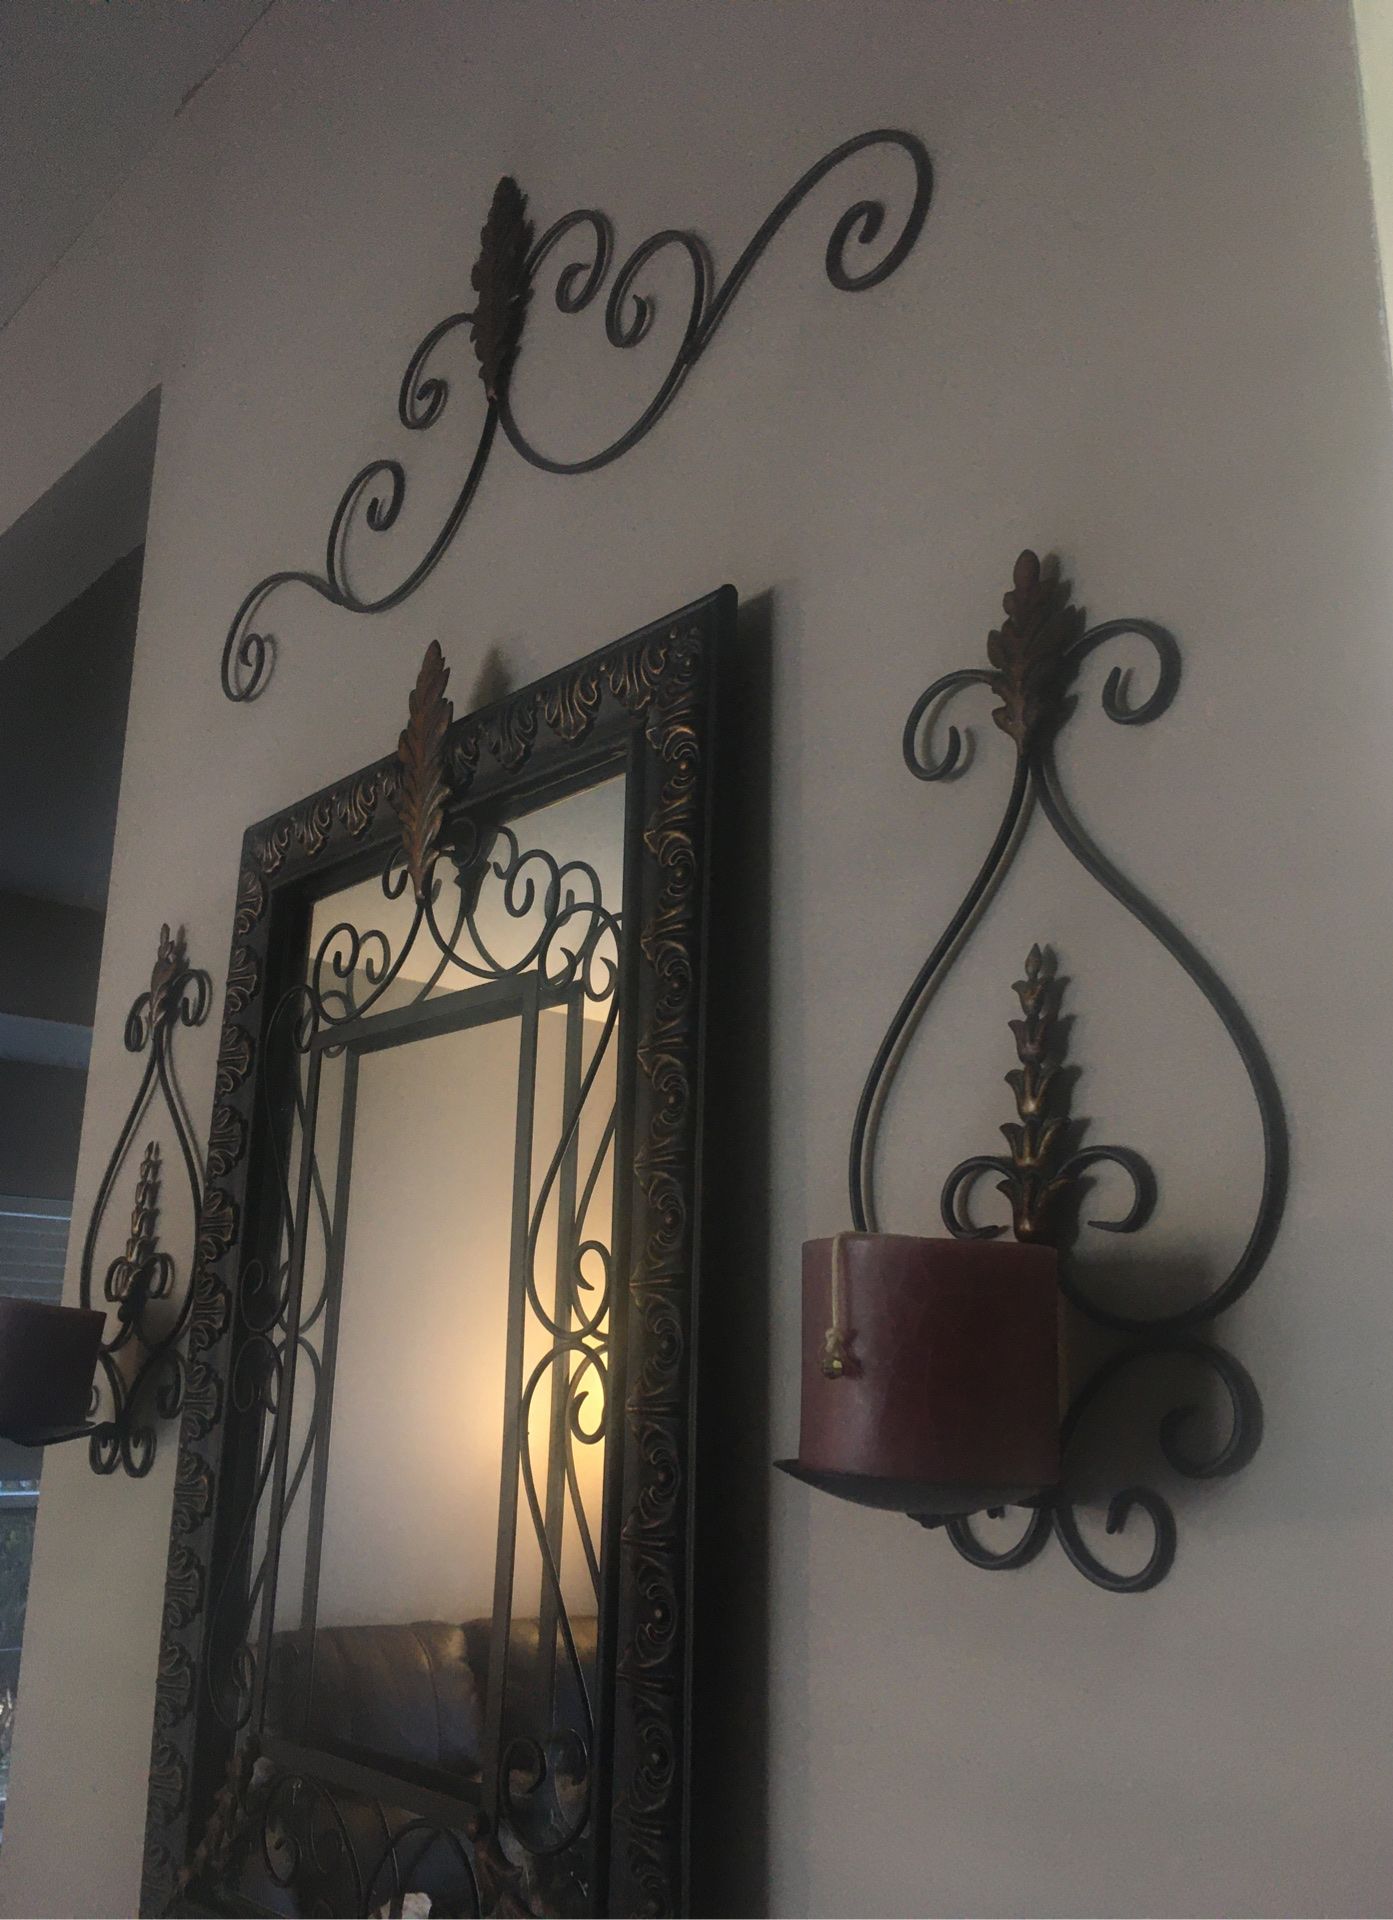 Wall decor - mirror/candle holders